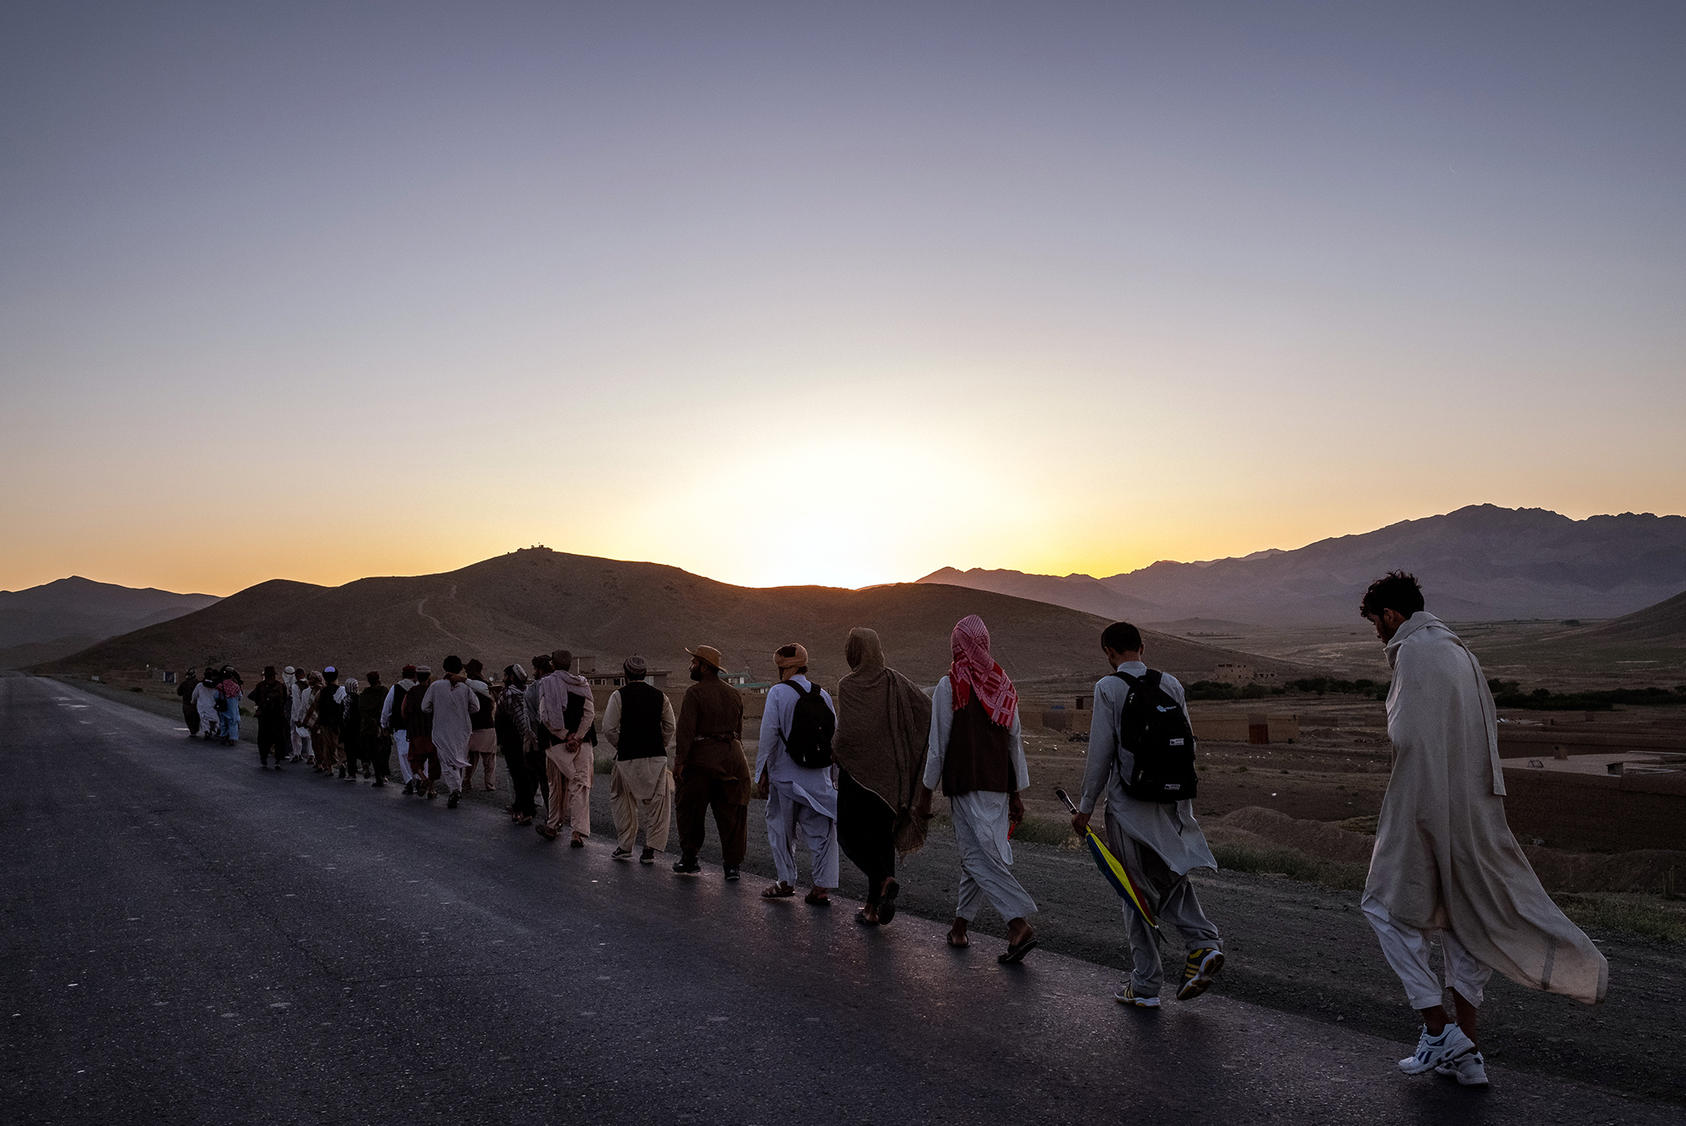 Dozens of men march for peace through southern Afghanistan, near Ghazni, on June 12, 2018. Talks between the Americans and the Taliban have many Afghans caught up in the hope of an unprecedented moment. (Jim Huylebroek/The New York Times)